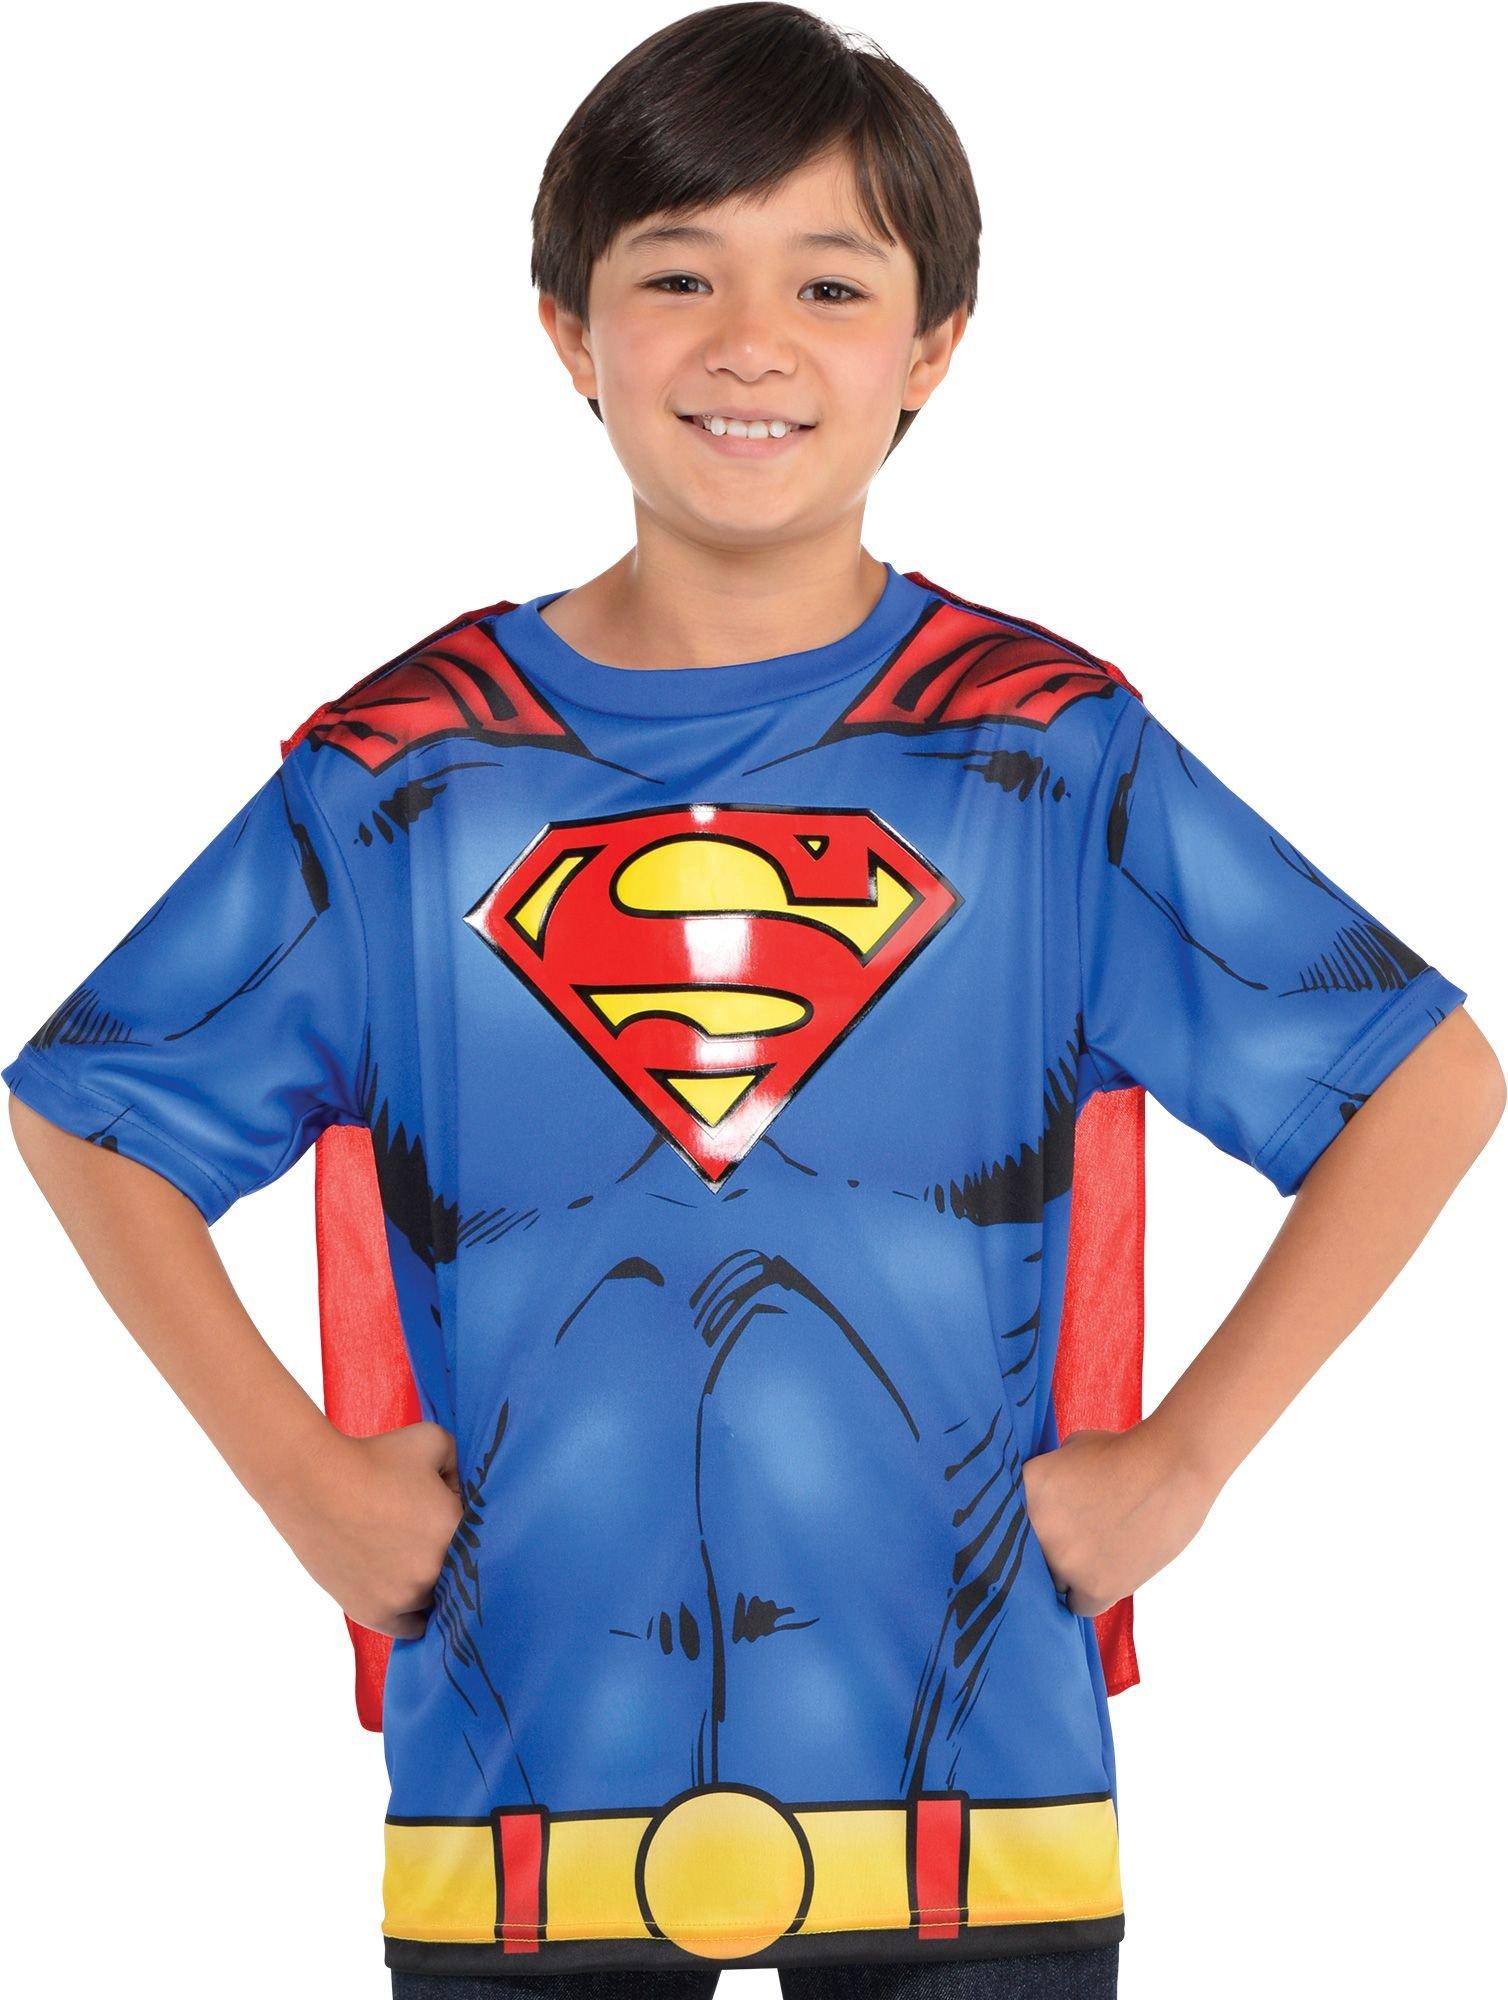 Boys Superman T-Shirt with Cape